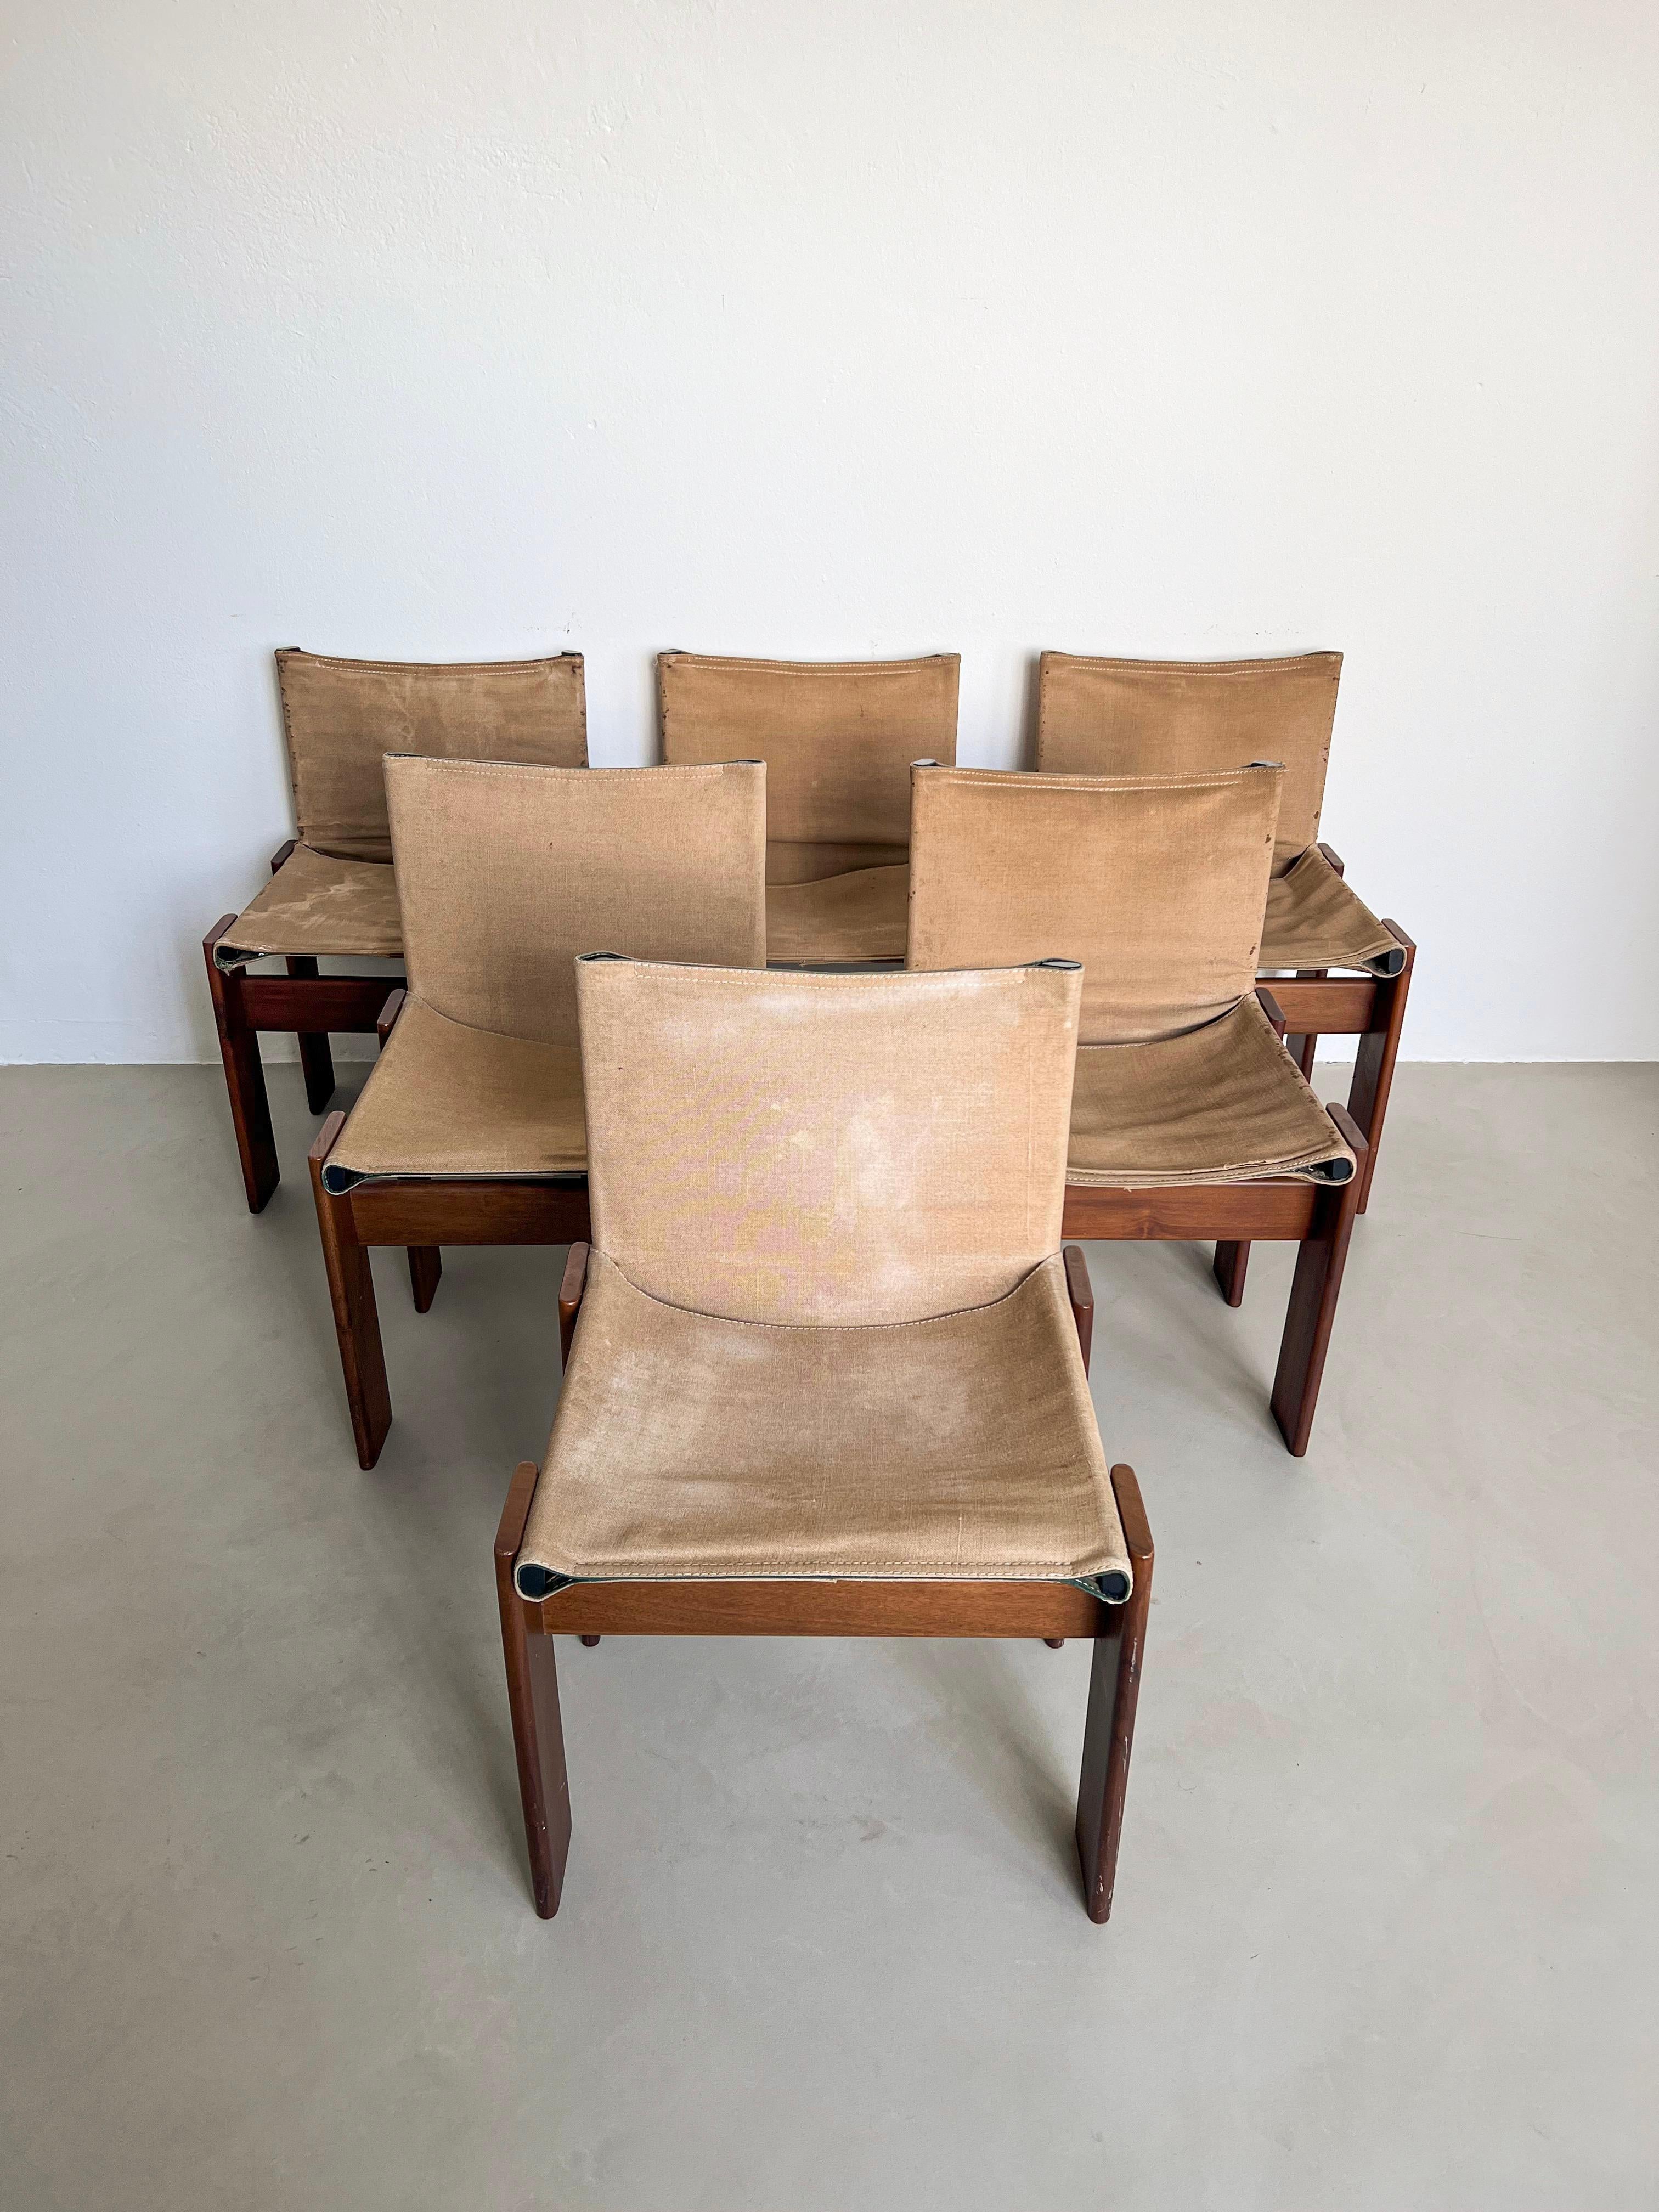 Spinzi is a Milano based creative atelier specialised in furniture design as well as sourcing and trading relevant mid-century collectible design. Check out our storefront and website for a constantly updated selection!

Offered for sale is a rare